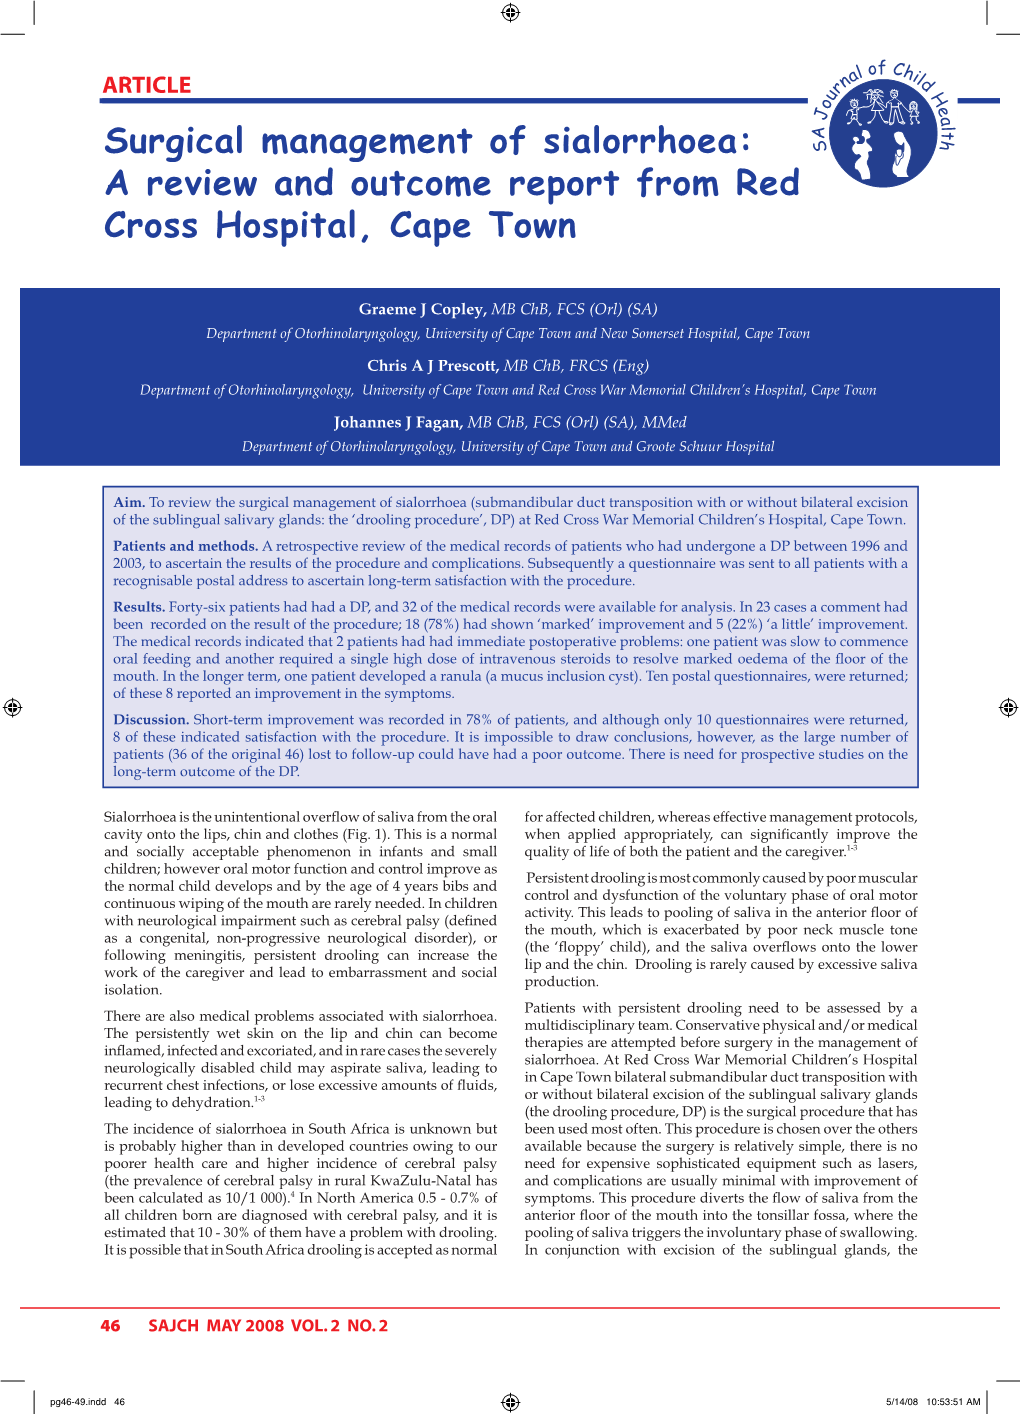 A Review and Outcome Report from Red Cross Hospital, Cape Town